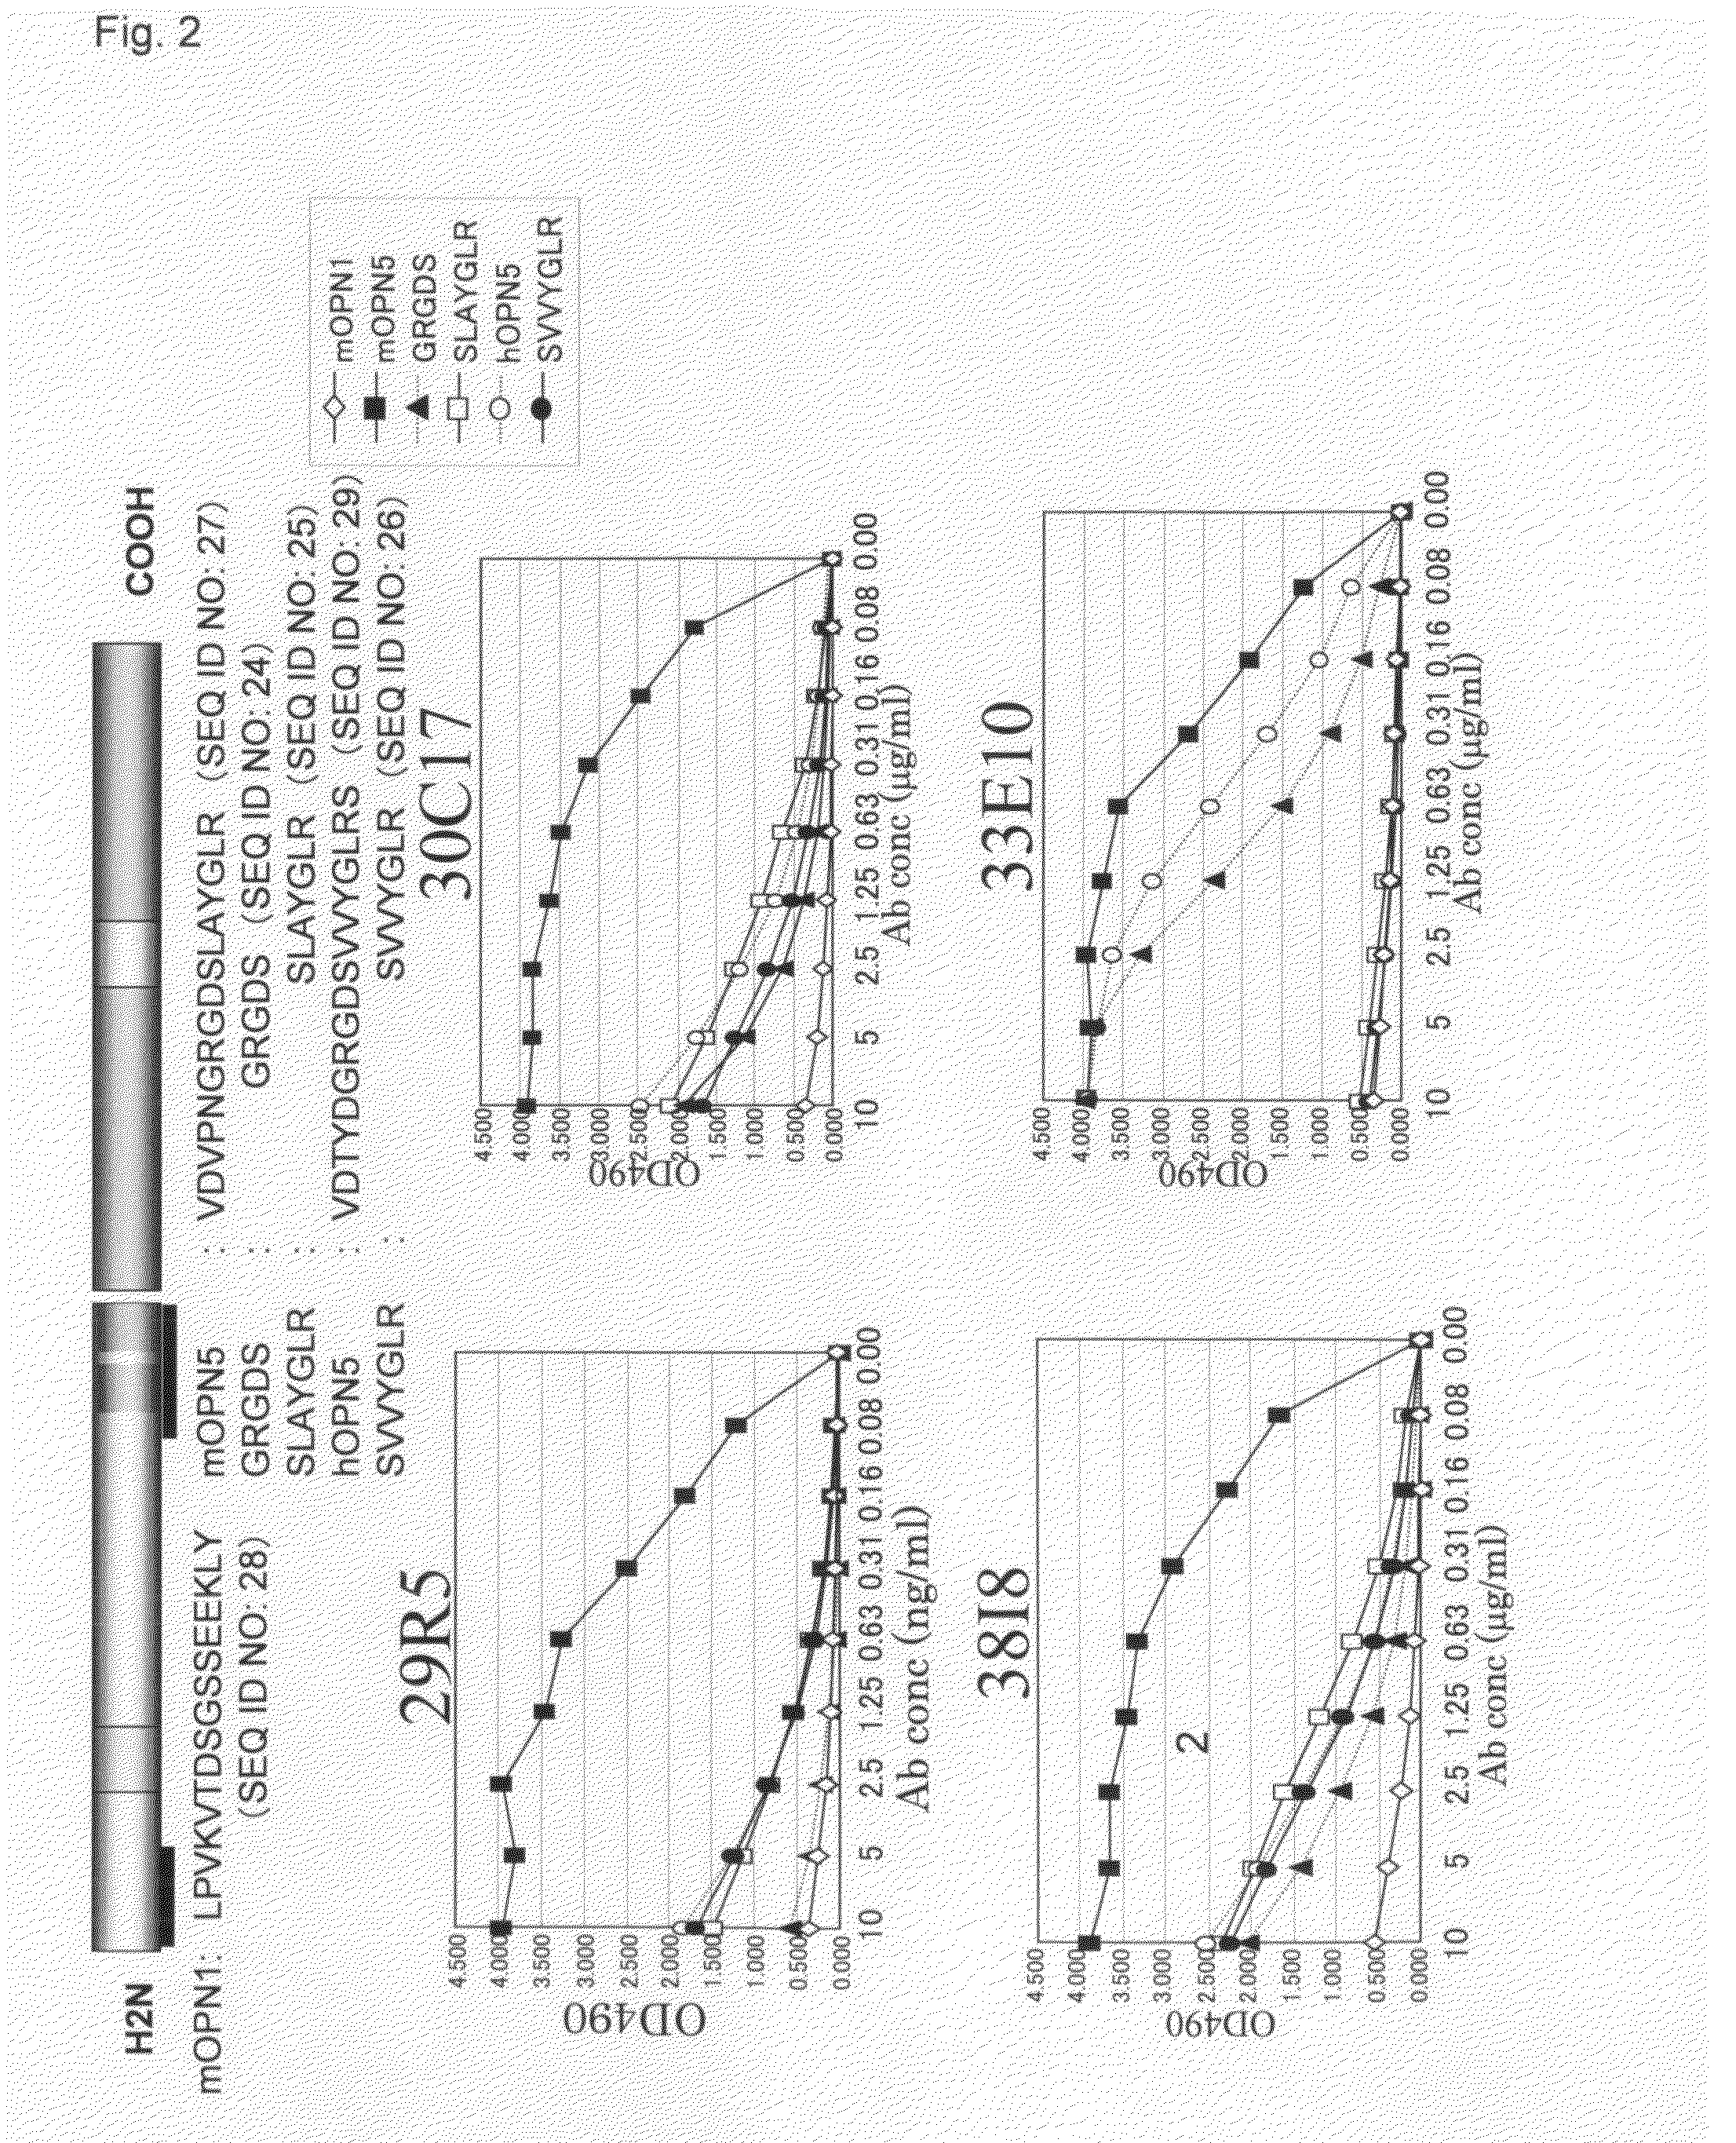 Antibody against rgd in amino acid sequence of extracellular matrix protein and production method and use of the same